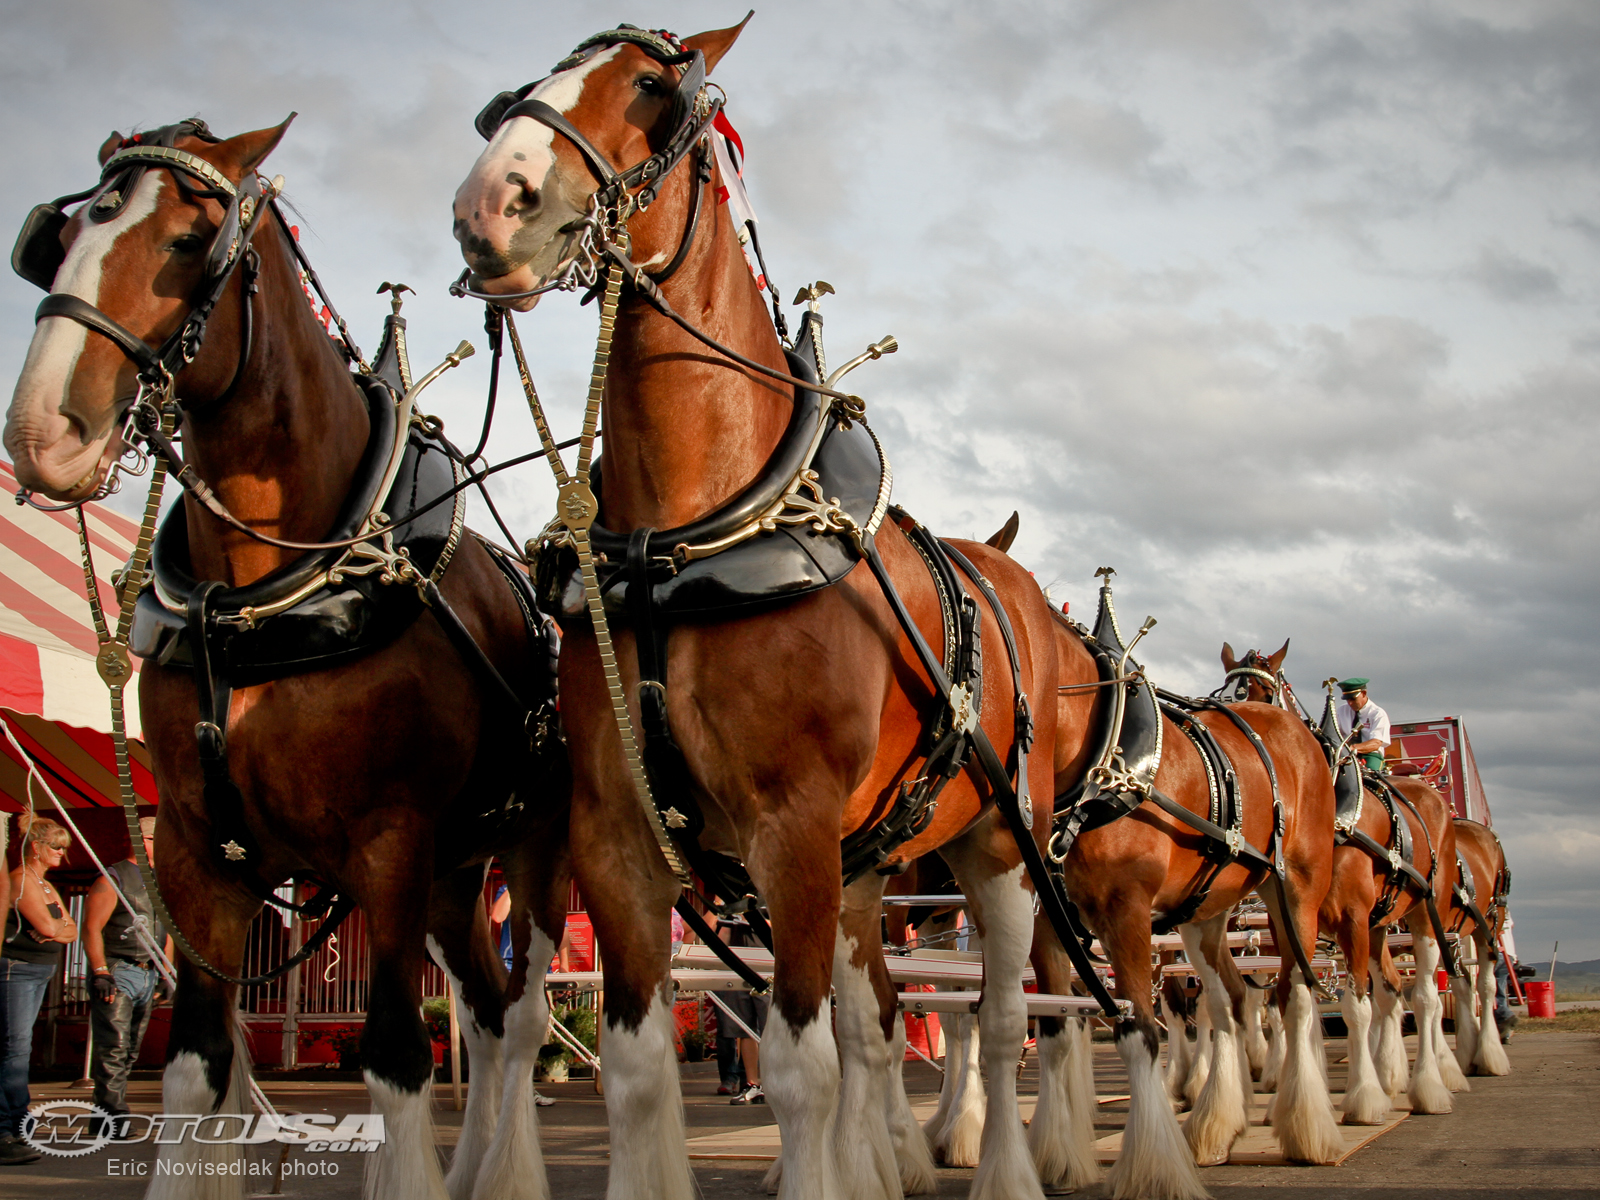 Budweiser Clydesdales Christmas Wallpaper Budweiser clydesdales